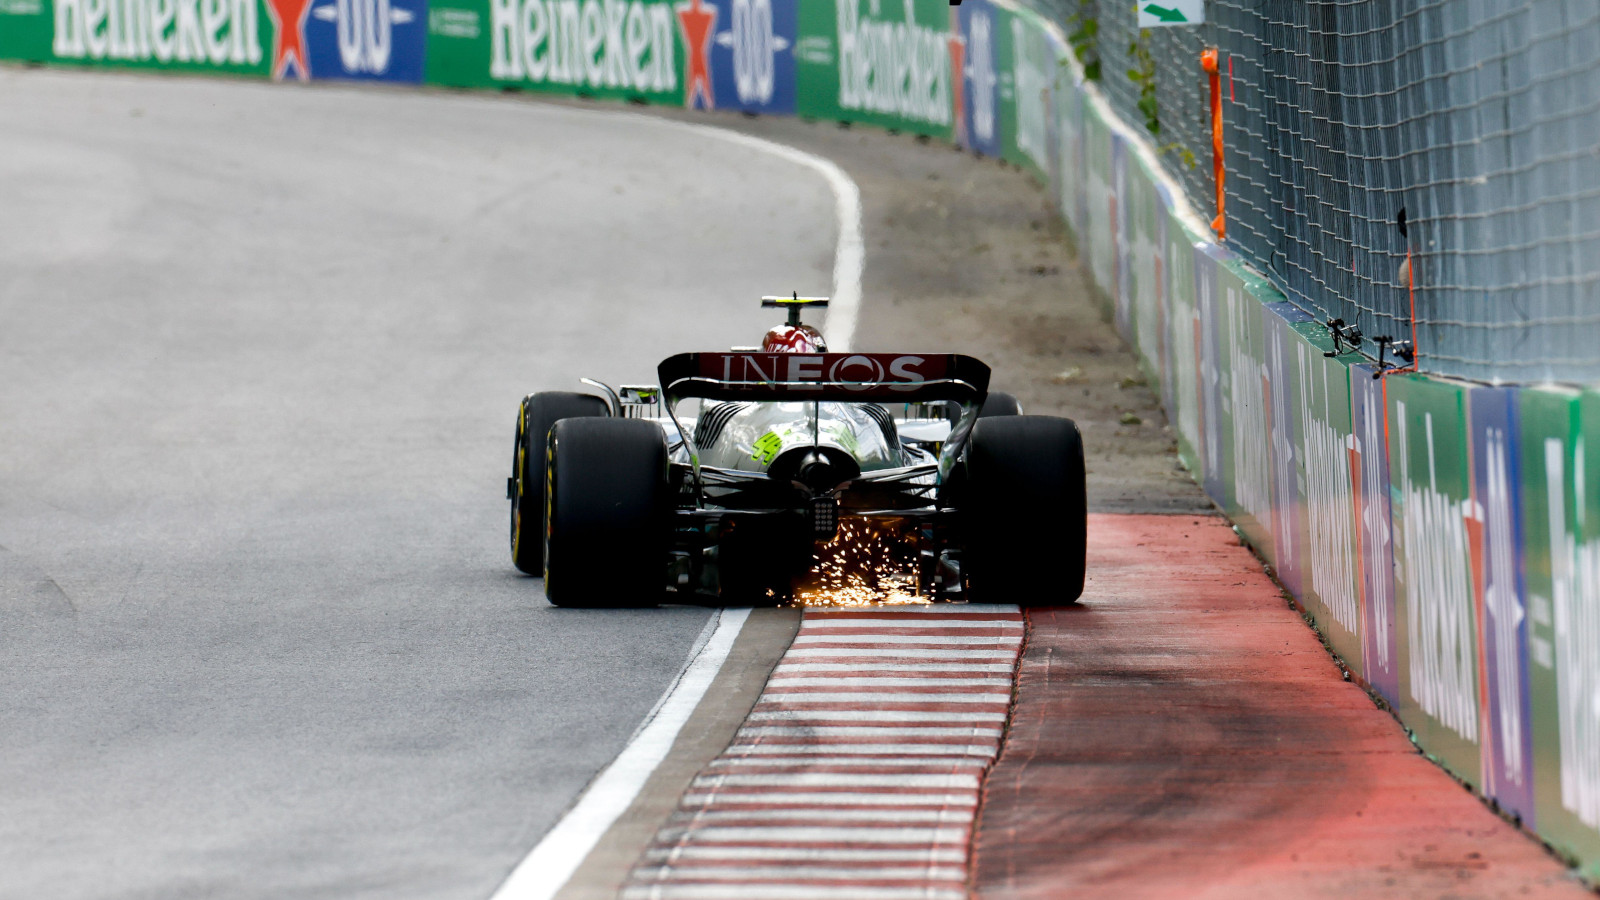 Lewis Hamilton from behind sparks on the kerb. Canada June 2022